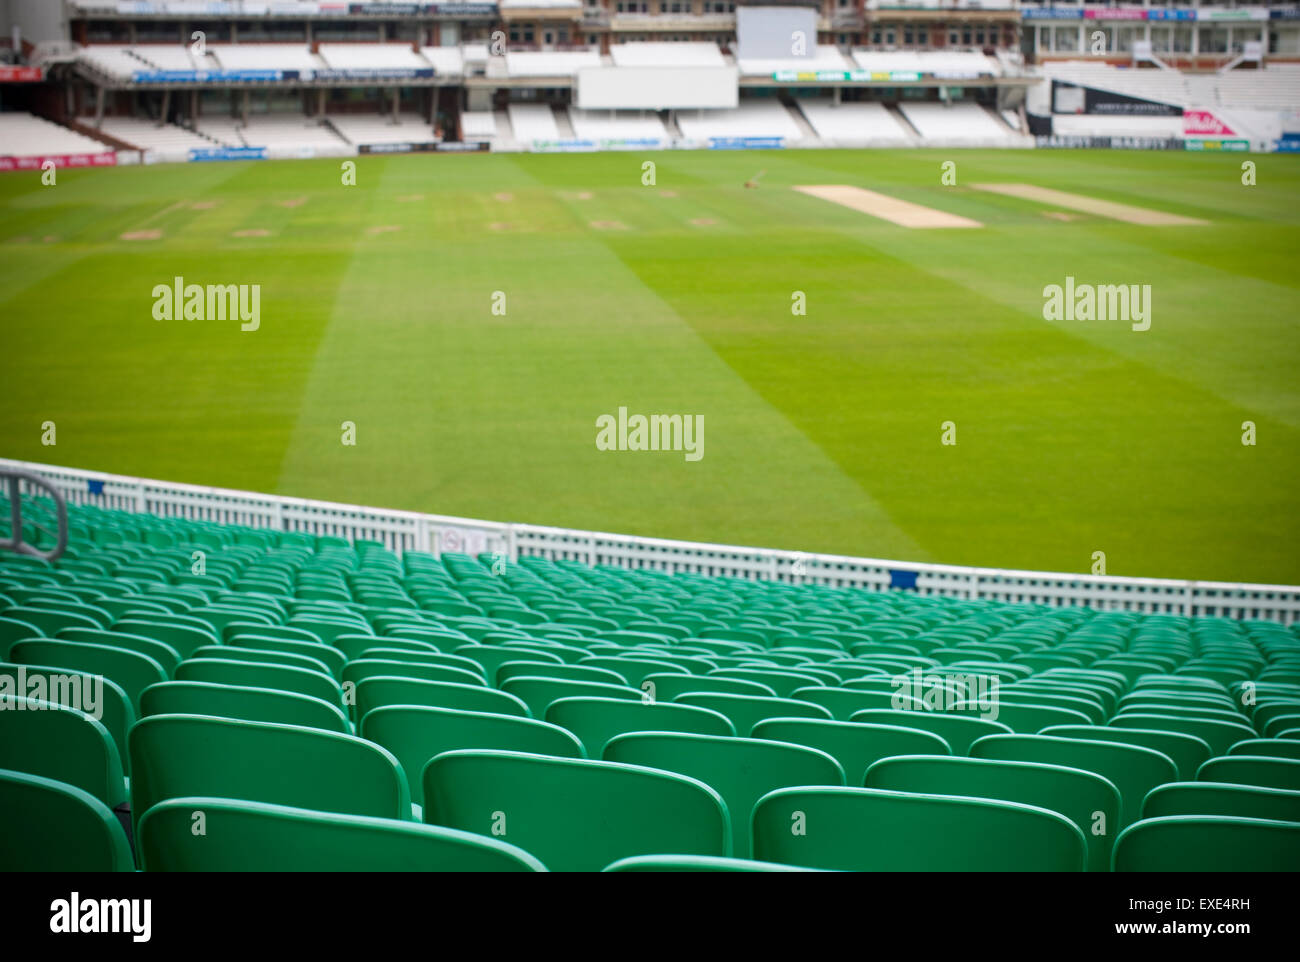 Oval Cricket Ground London Banque D'Images